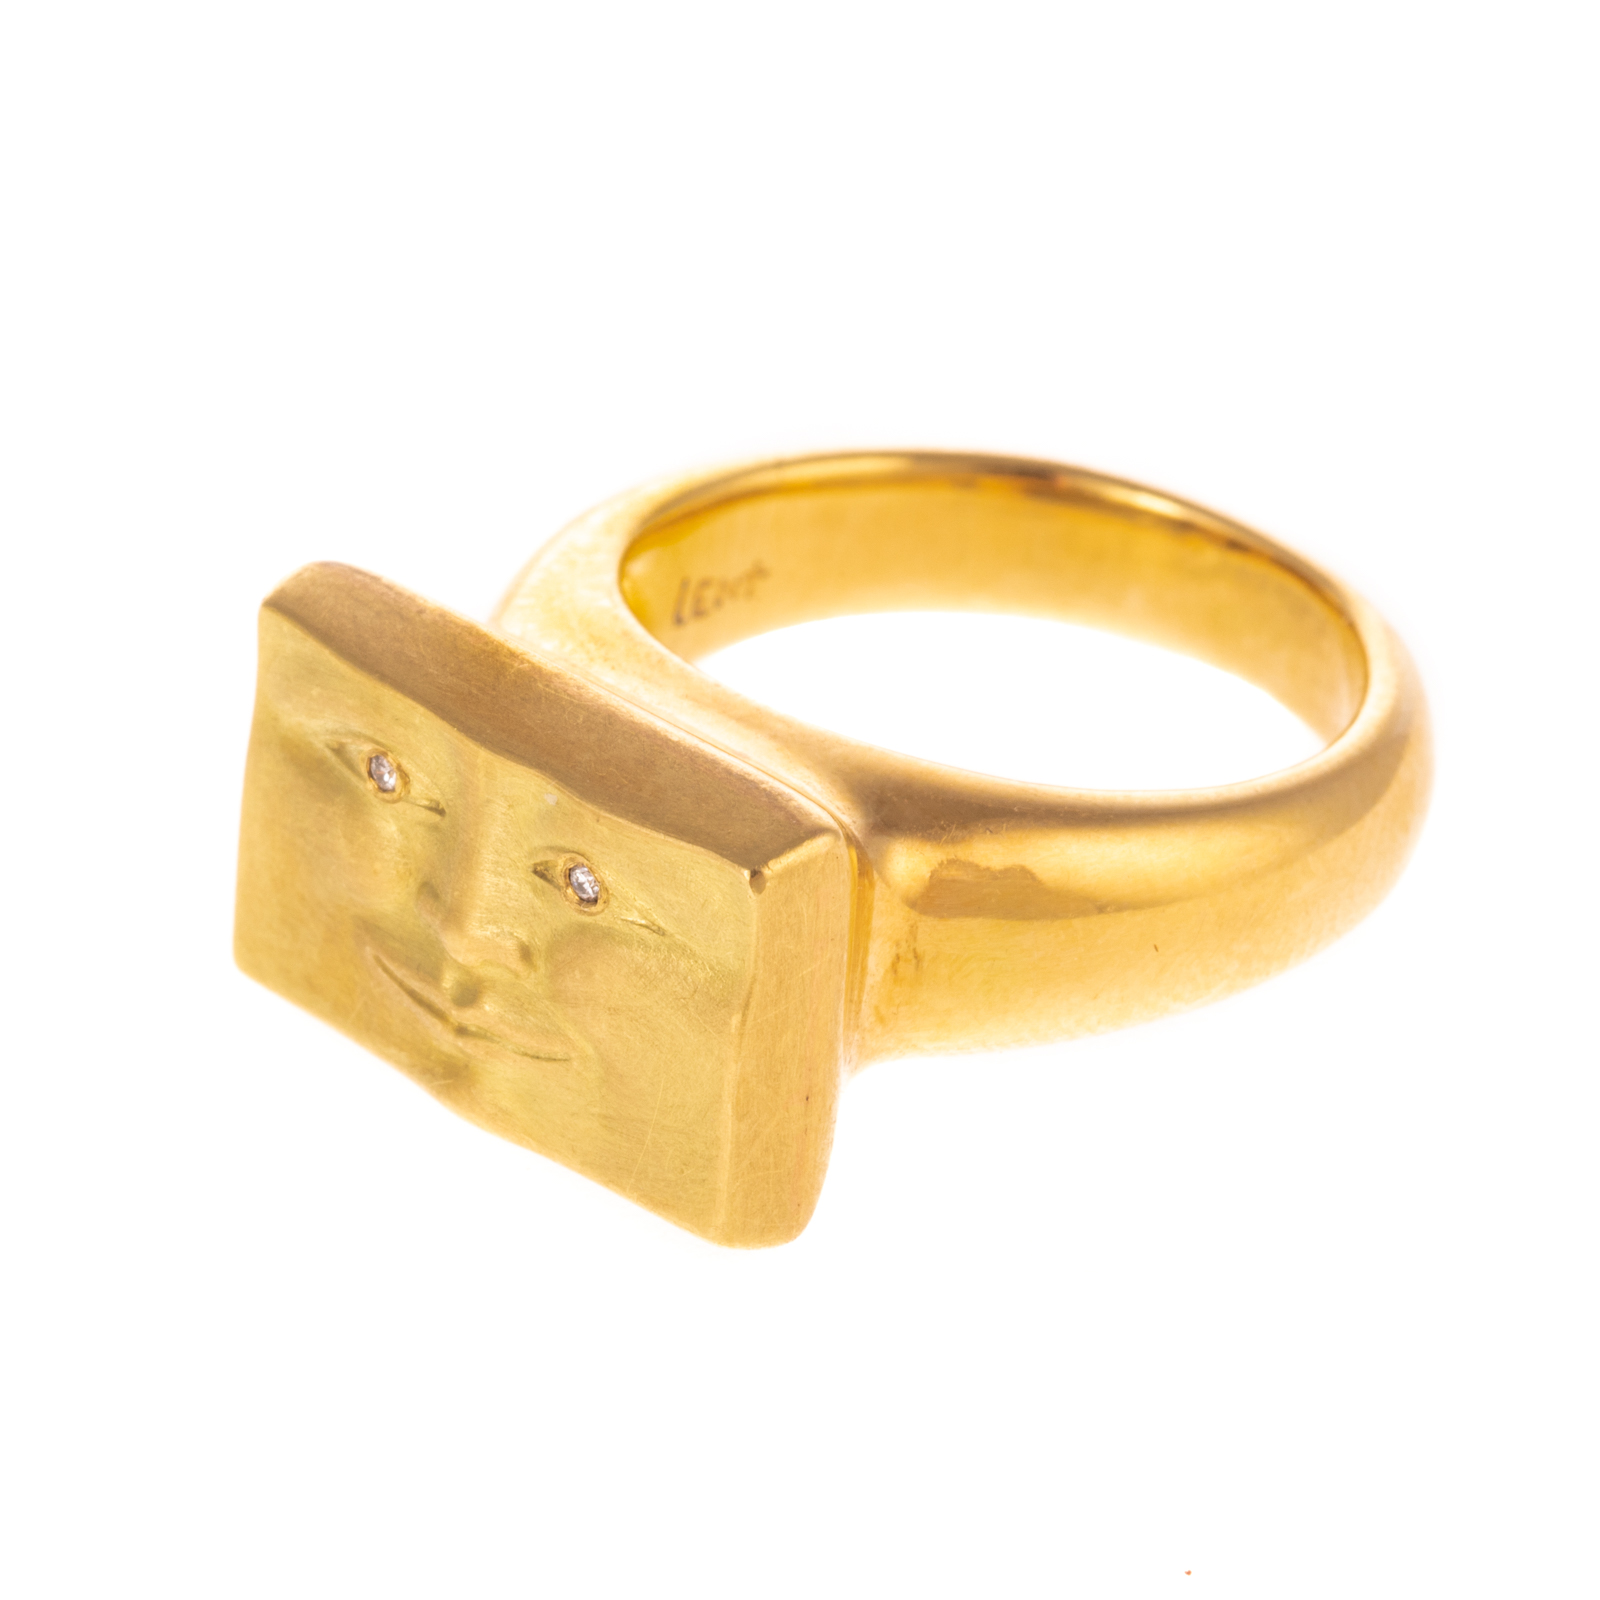 A SOLID 18K RECTANGULAR FACE RING 3385cc